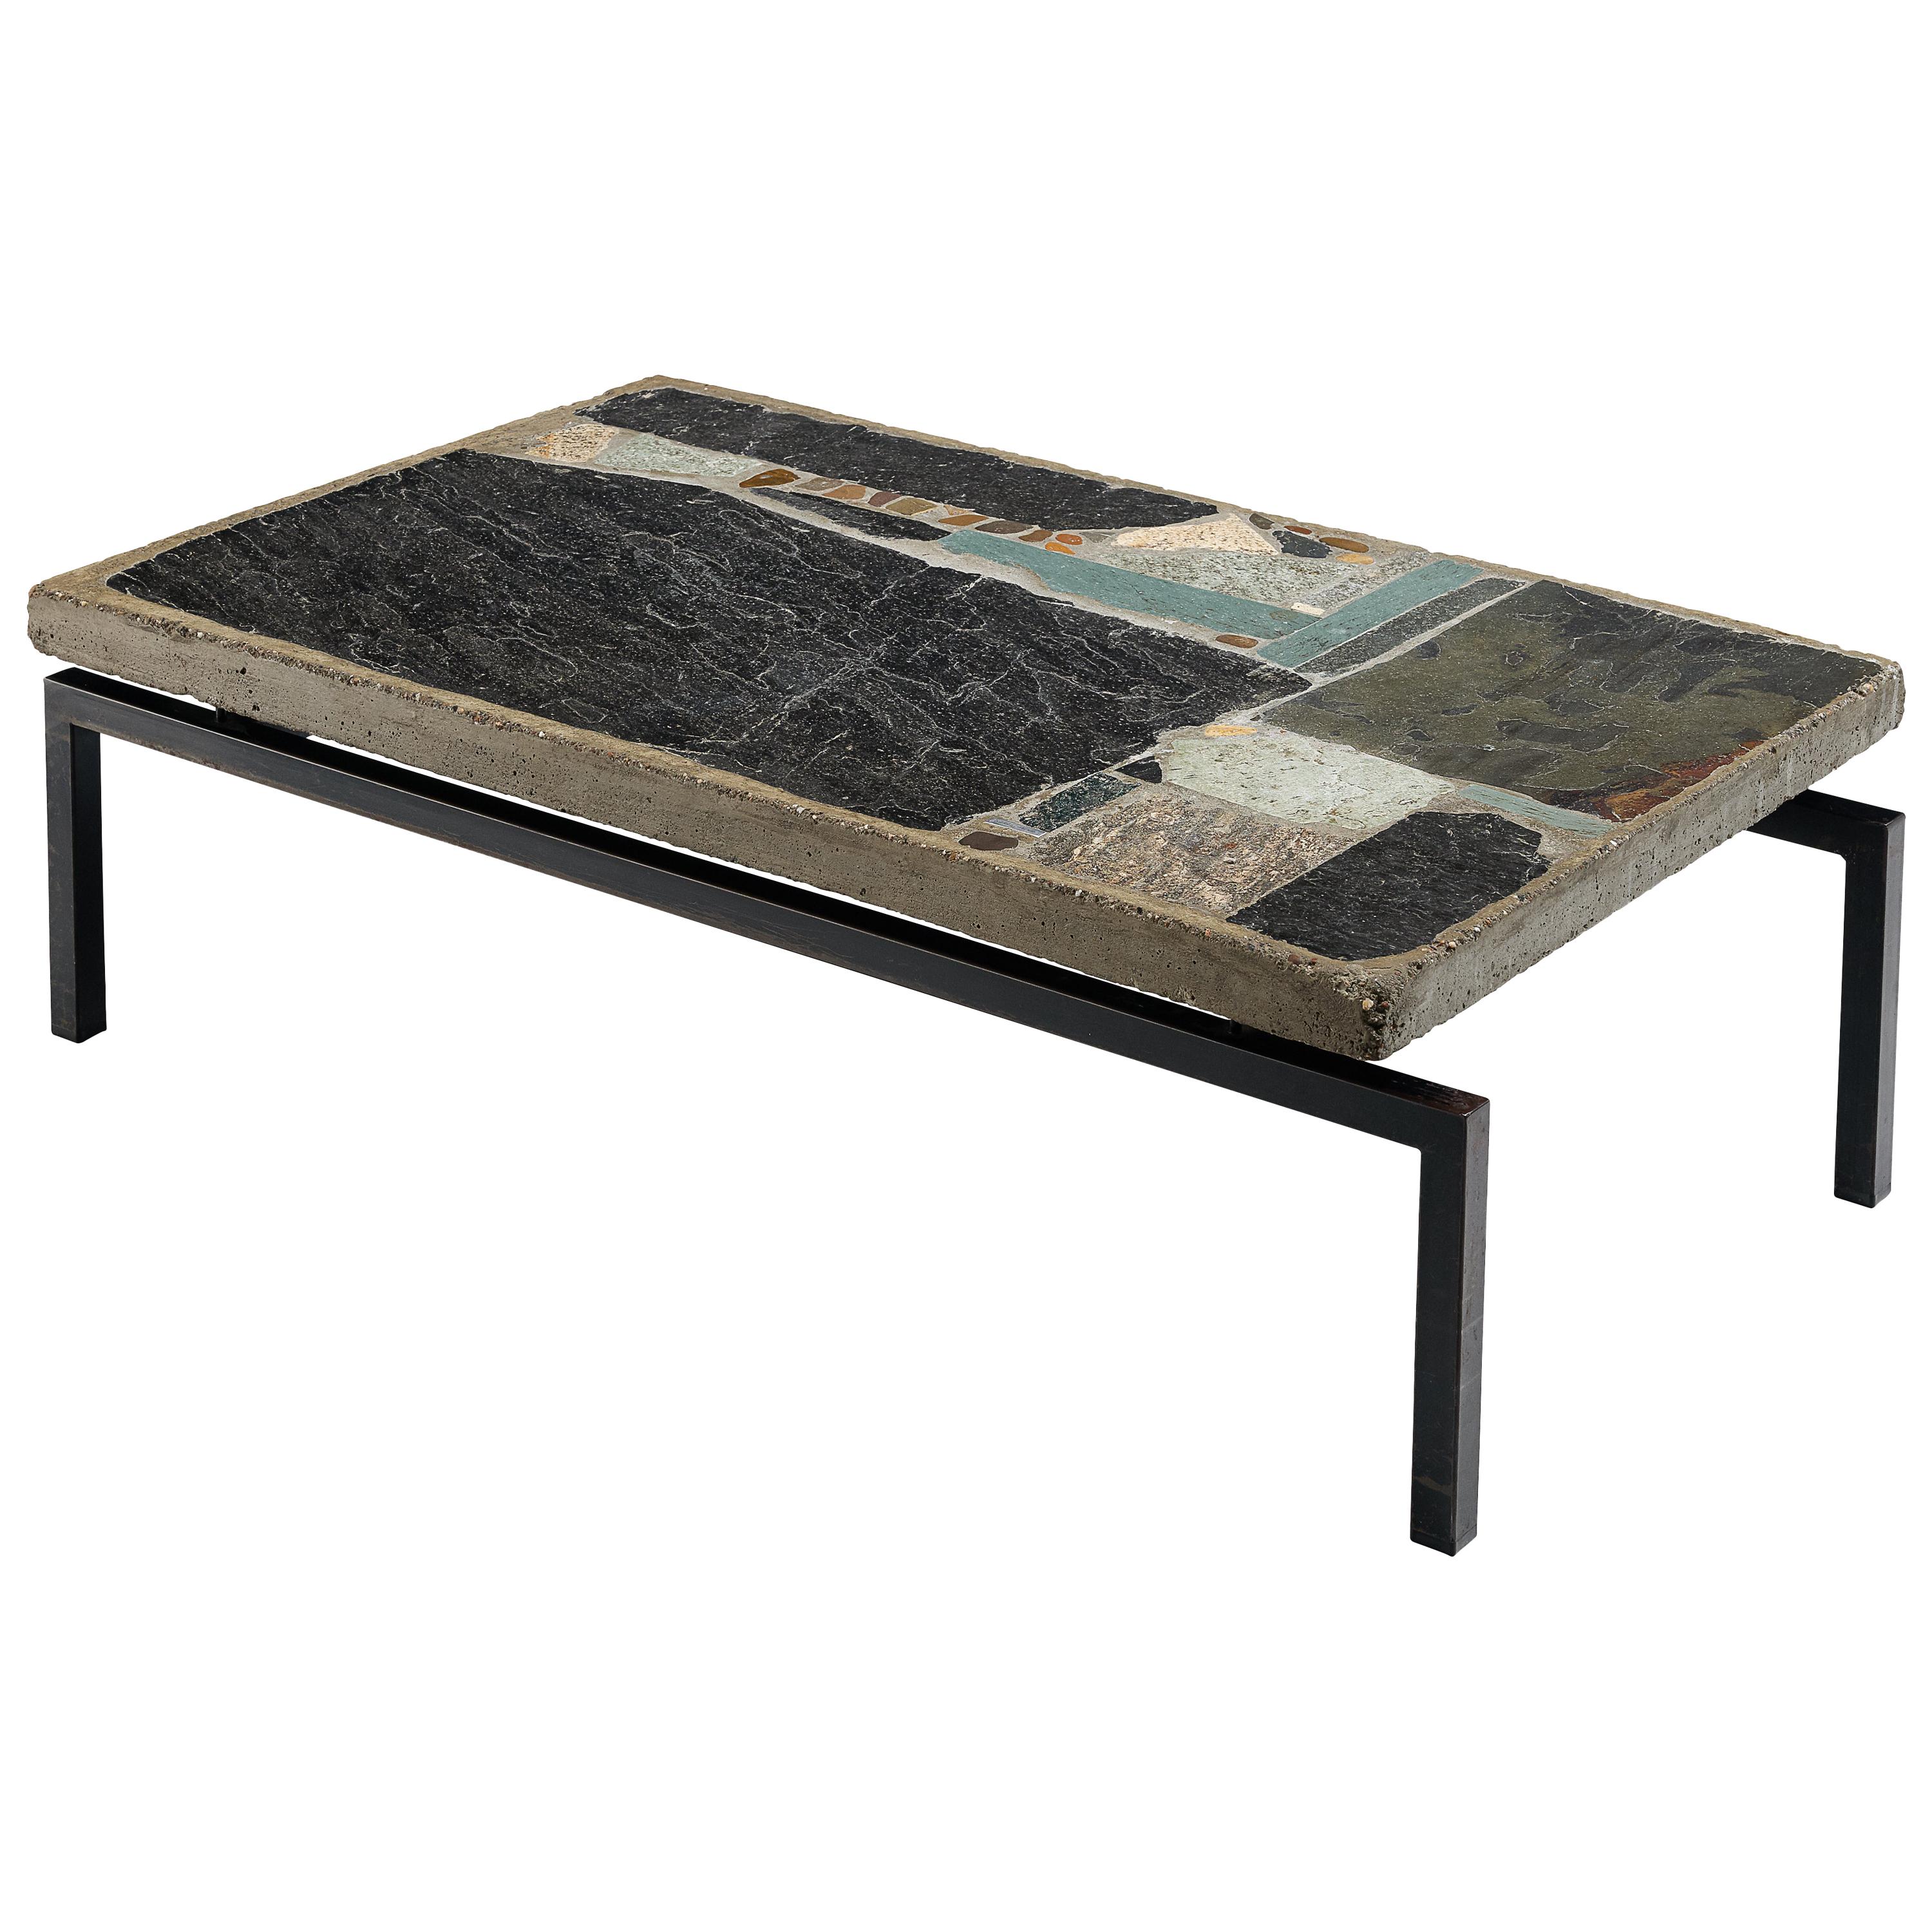 Paul Kingma Handcrafted Coffee Table in Slate and Ceramic